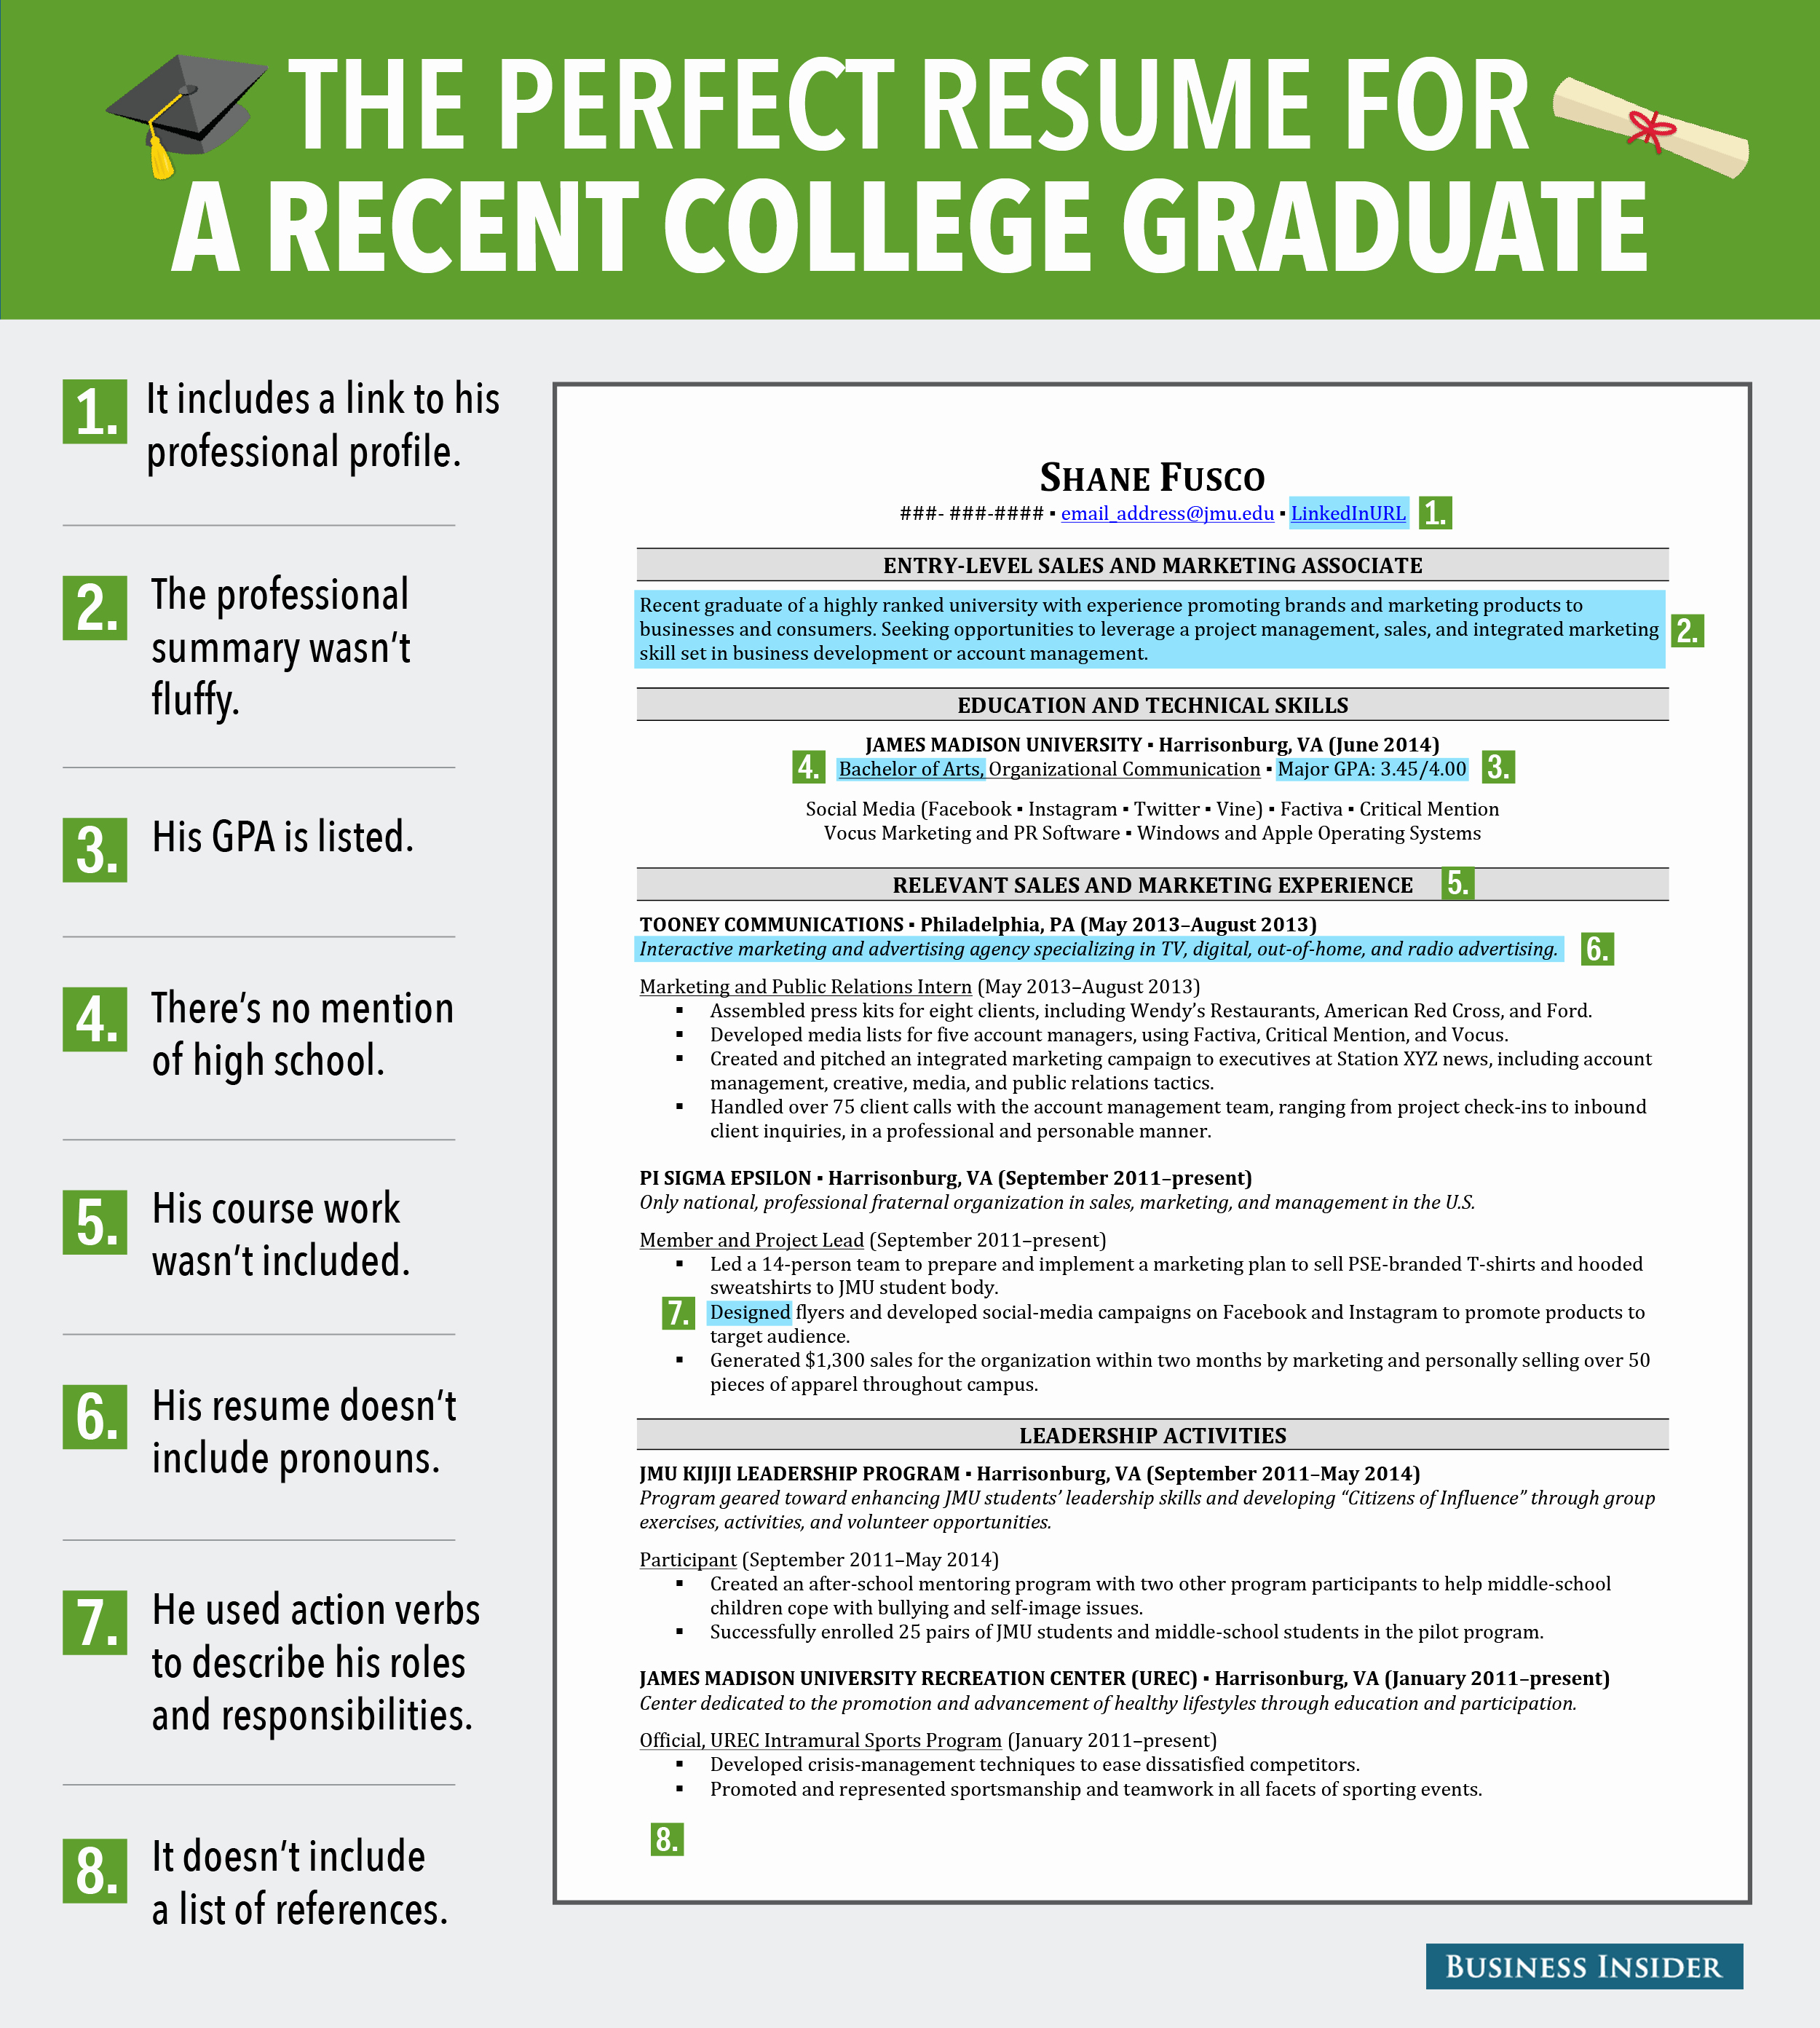 Resume for New College Graduate Lovely Excellent Resume for Recent Grad Business Insider